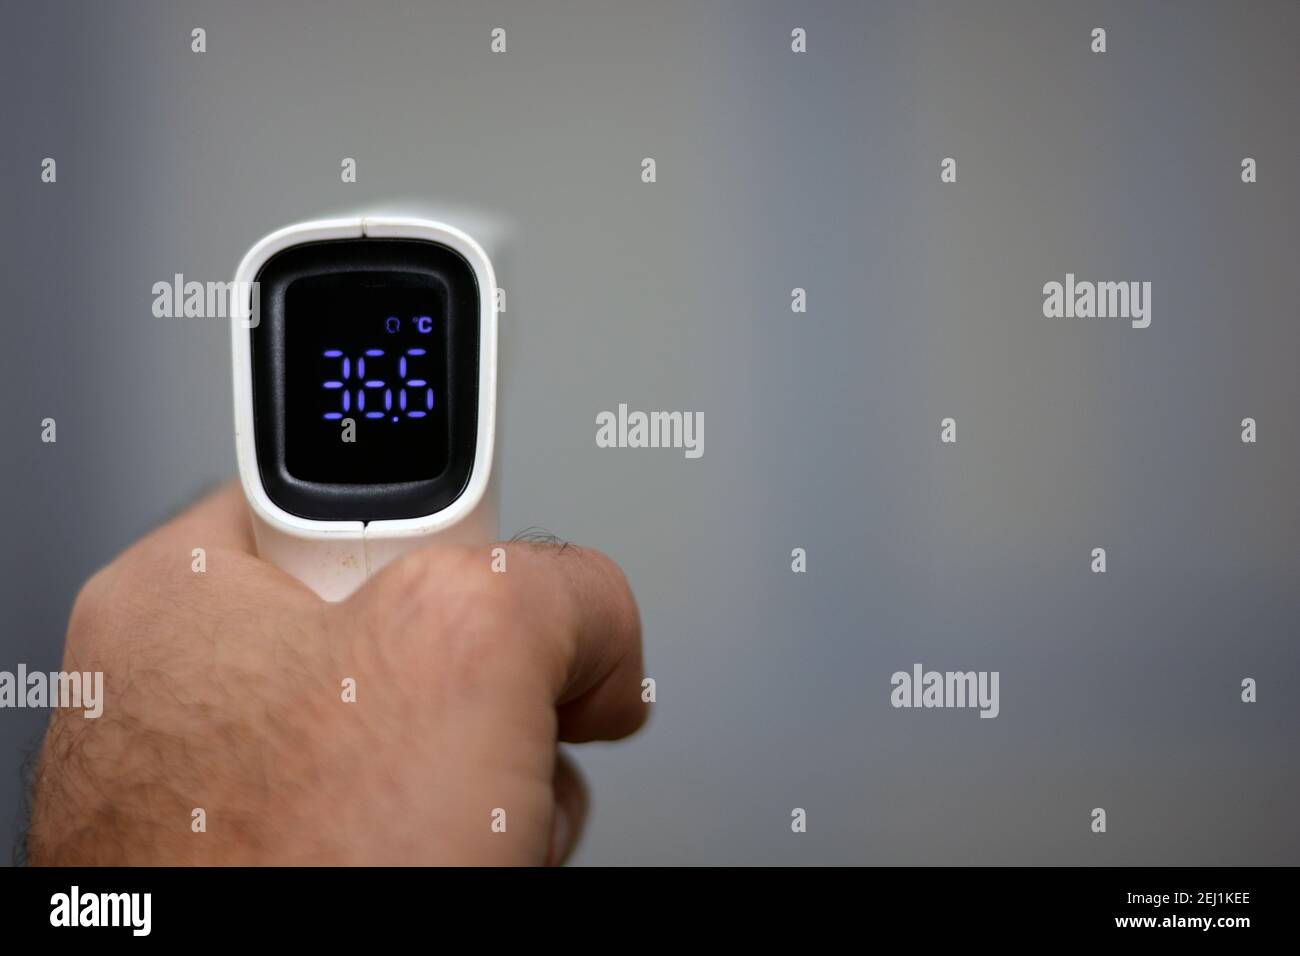 https://c8.alamy.com/comp/2EJ1KEE/non-contact-infrared-forehead-digital-thermometer-held-by-a-young-man-with-left-hand-with-a-defocused-background-close-up-view-2EJ1KEE.jpg